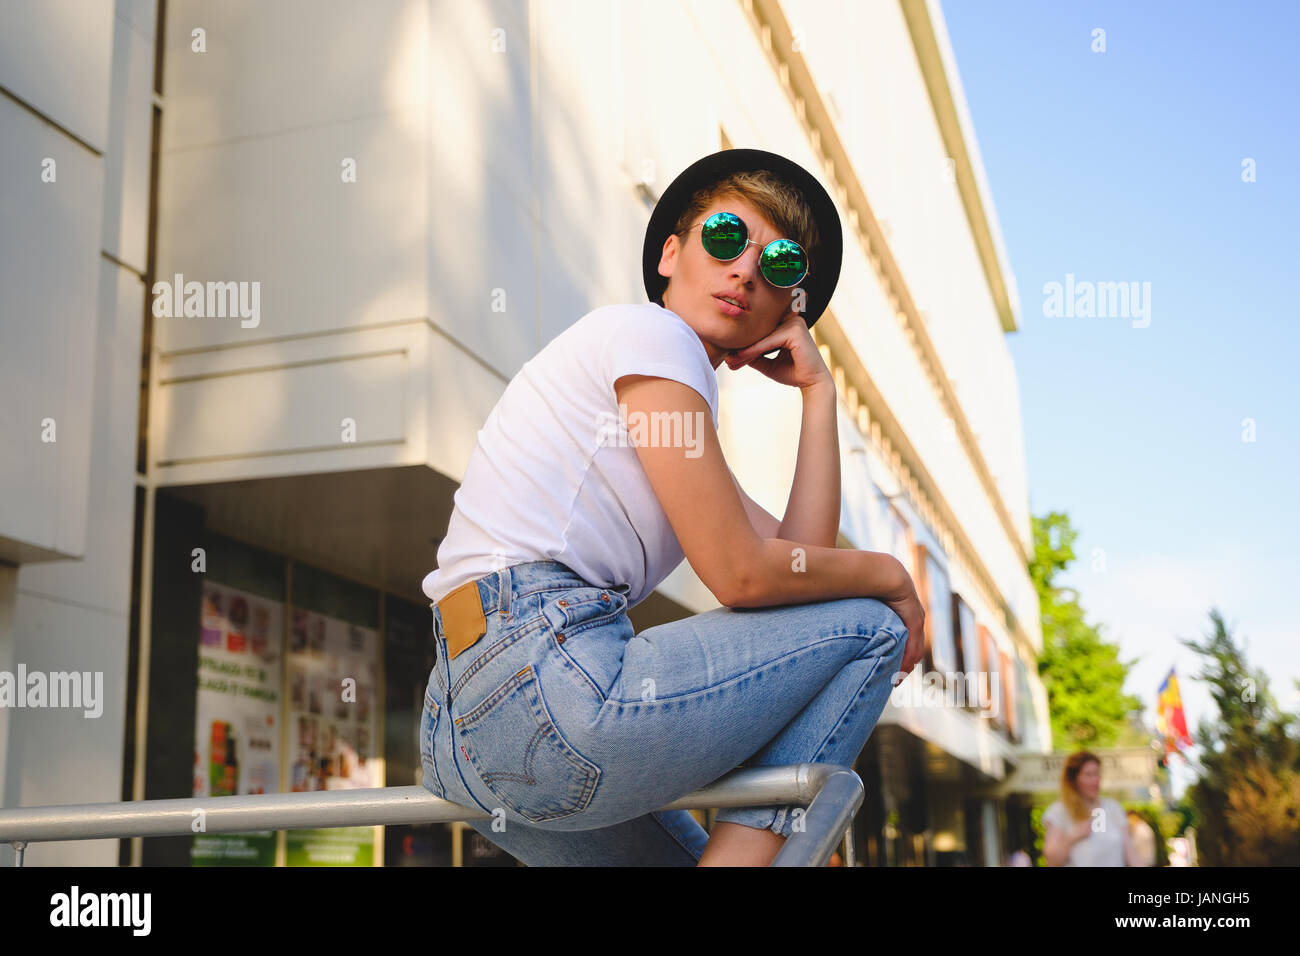 Close up portrait of female hipster with natural makeup and short haircut enjoying leisure time outdoors Stock Photo